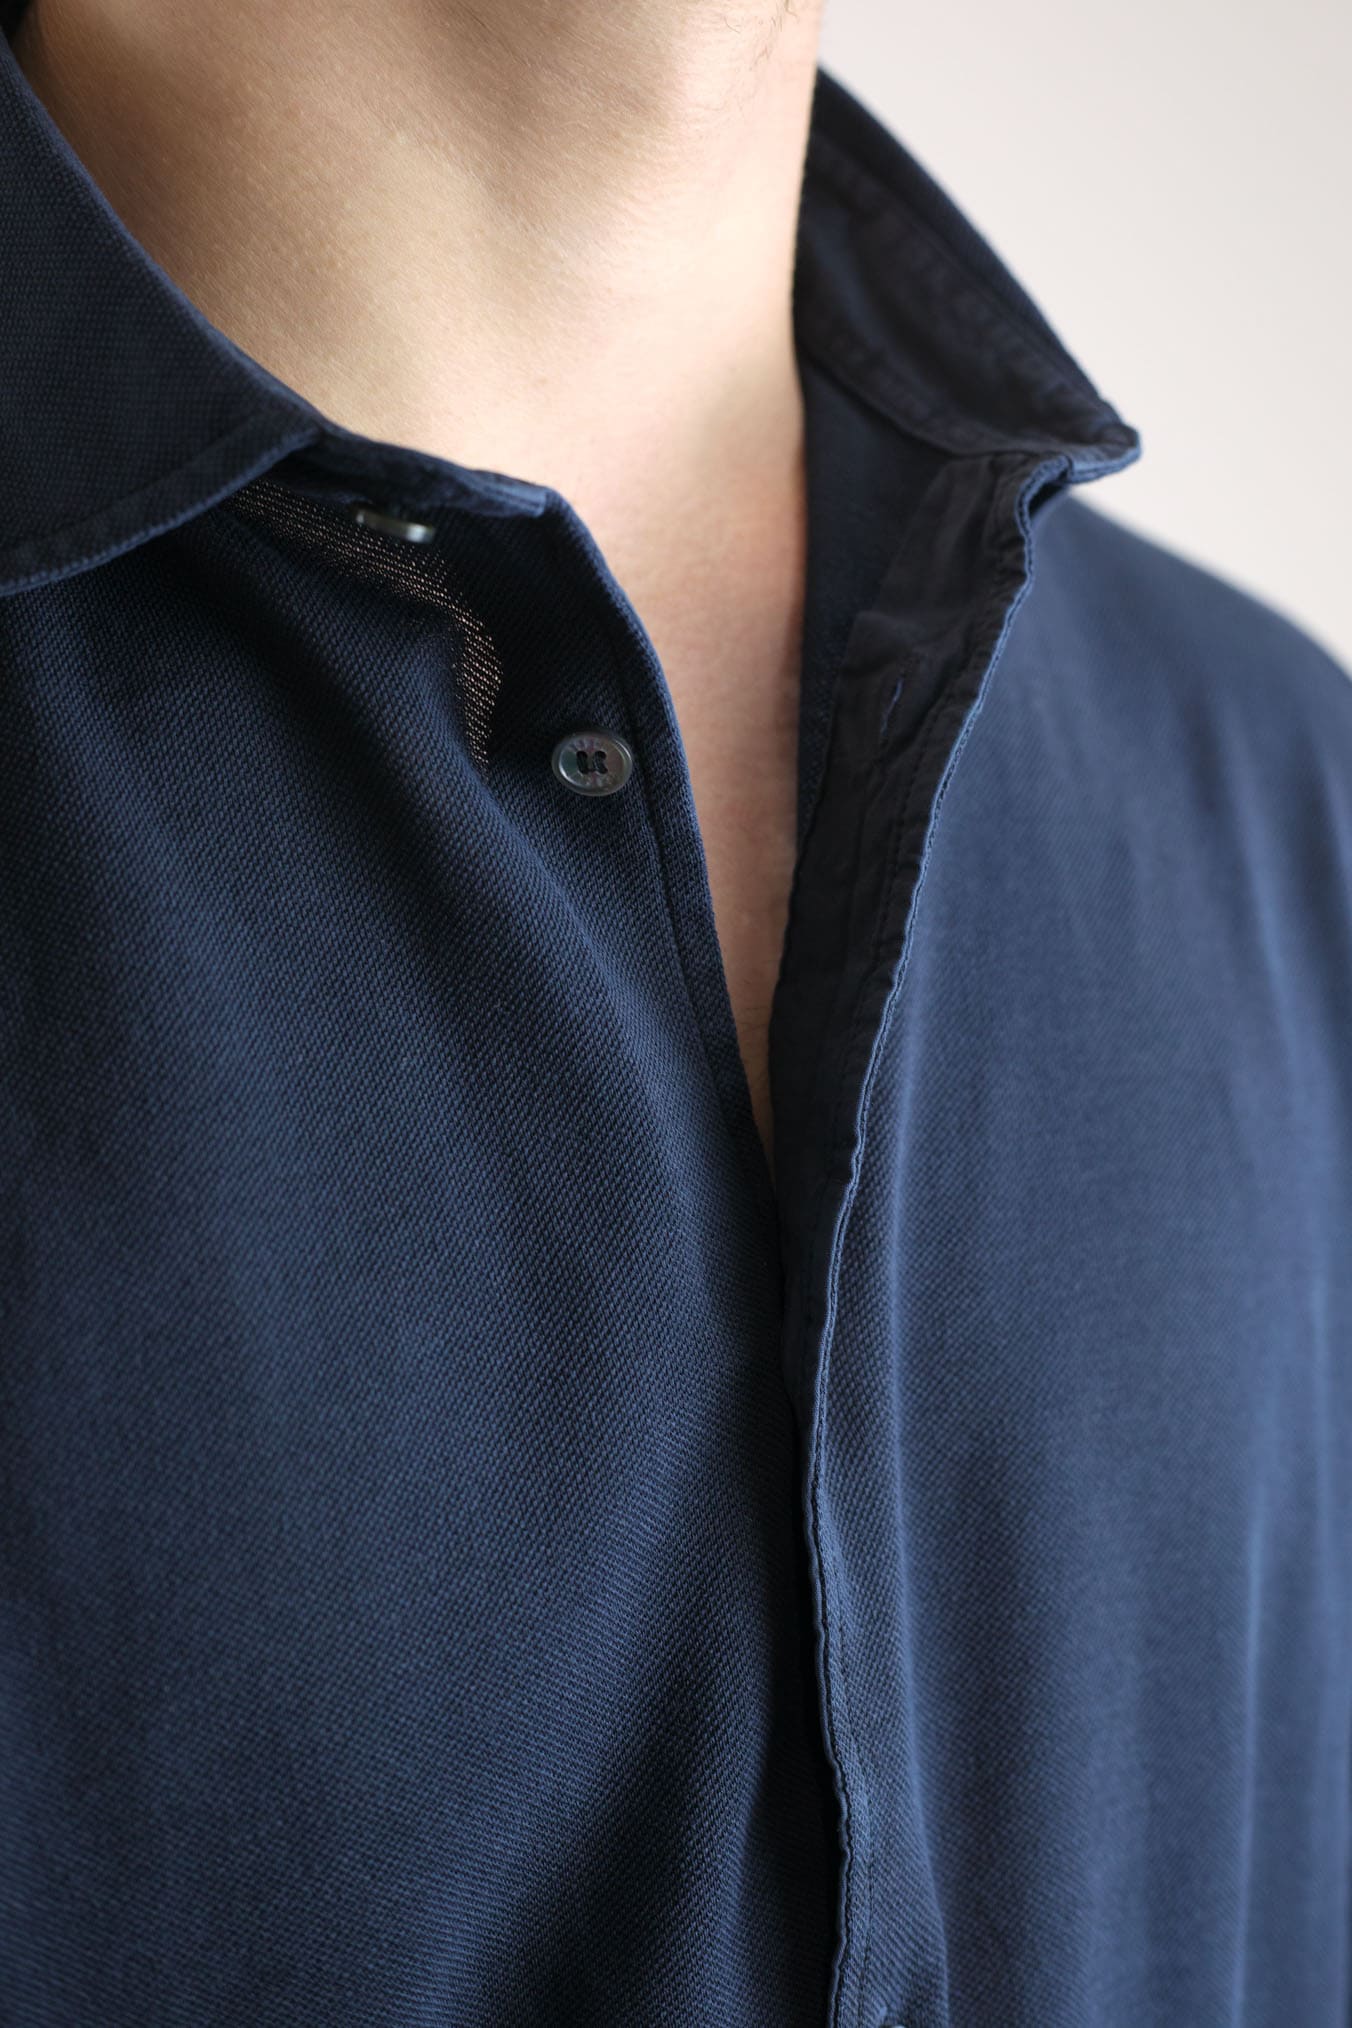 FEDELI Navy Blue Frosted Piquet Cotton Shirt